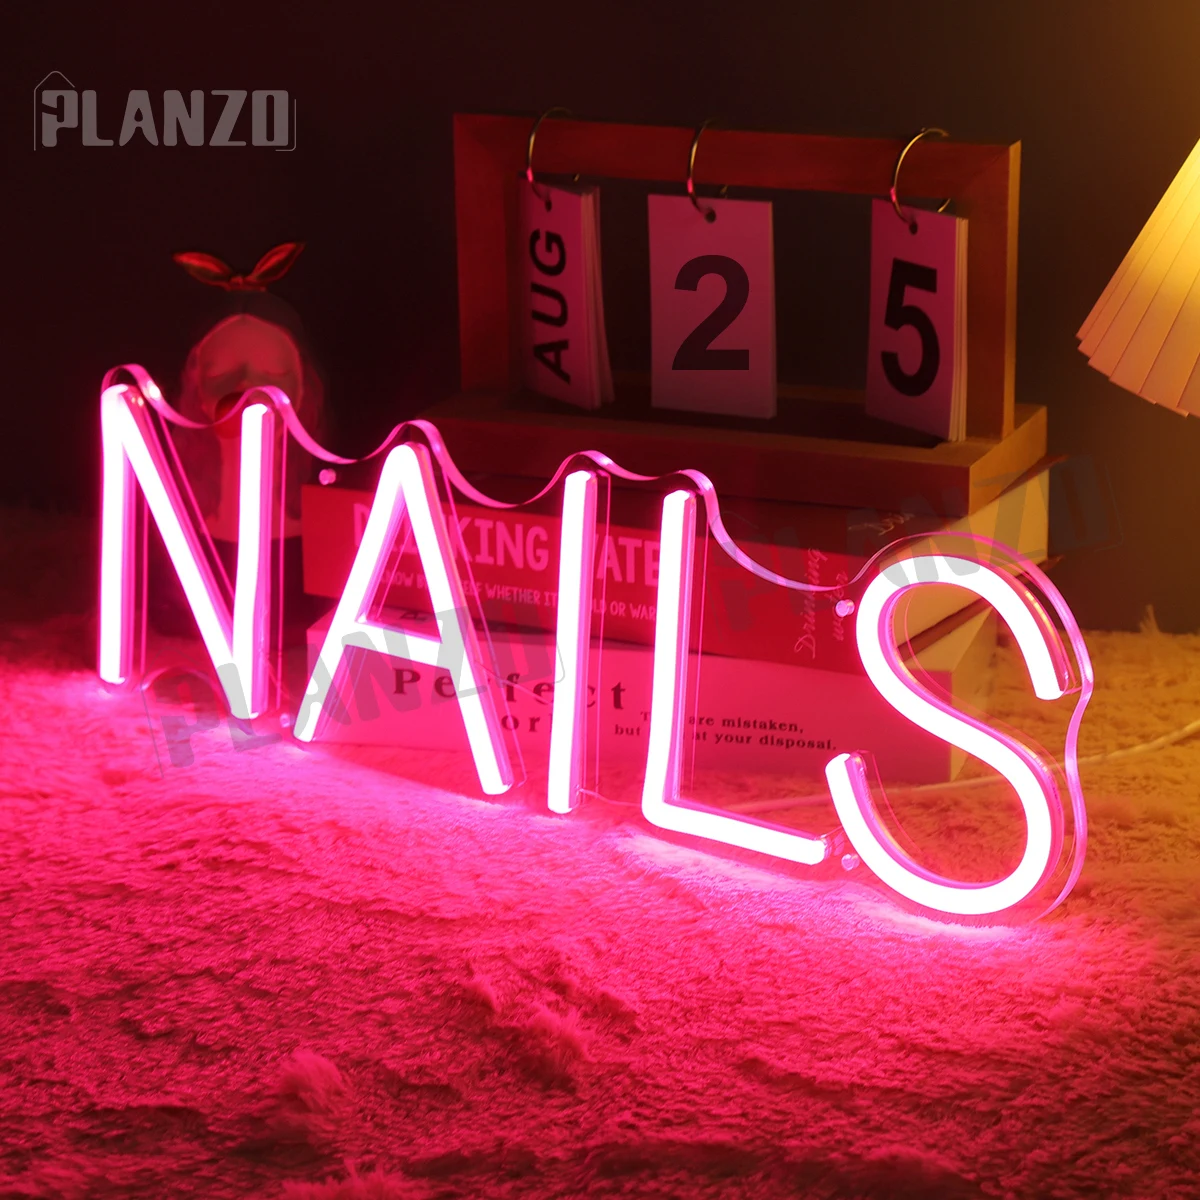 NAILS Neon Sign Led Pink Neon Light Up Signs for Wall Decor Usb Neon Lights Salon Beauty Room Decor Lights Bedroom Shop Indoor led neon open sign for business neon lights open sign led wall decor neon led signs adjustable brightness bar salon stores hotel